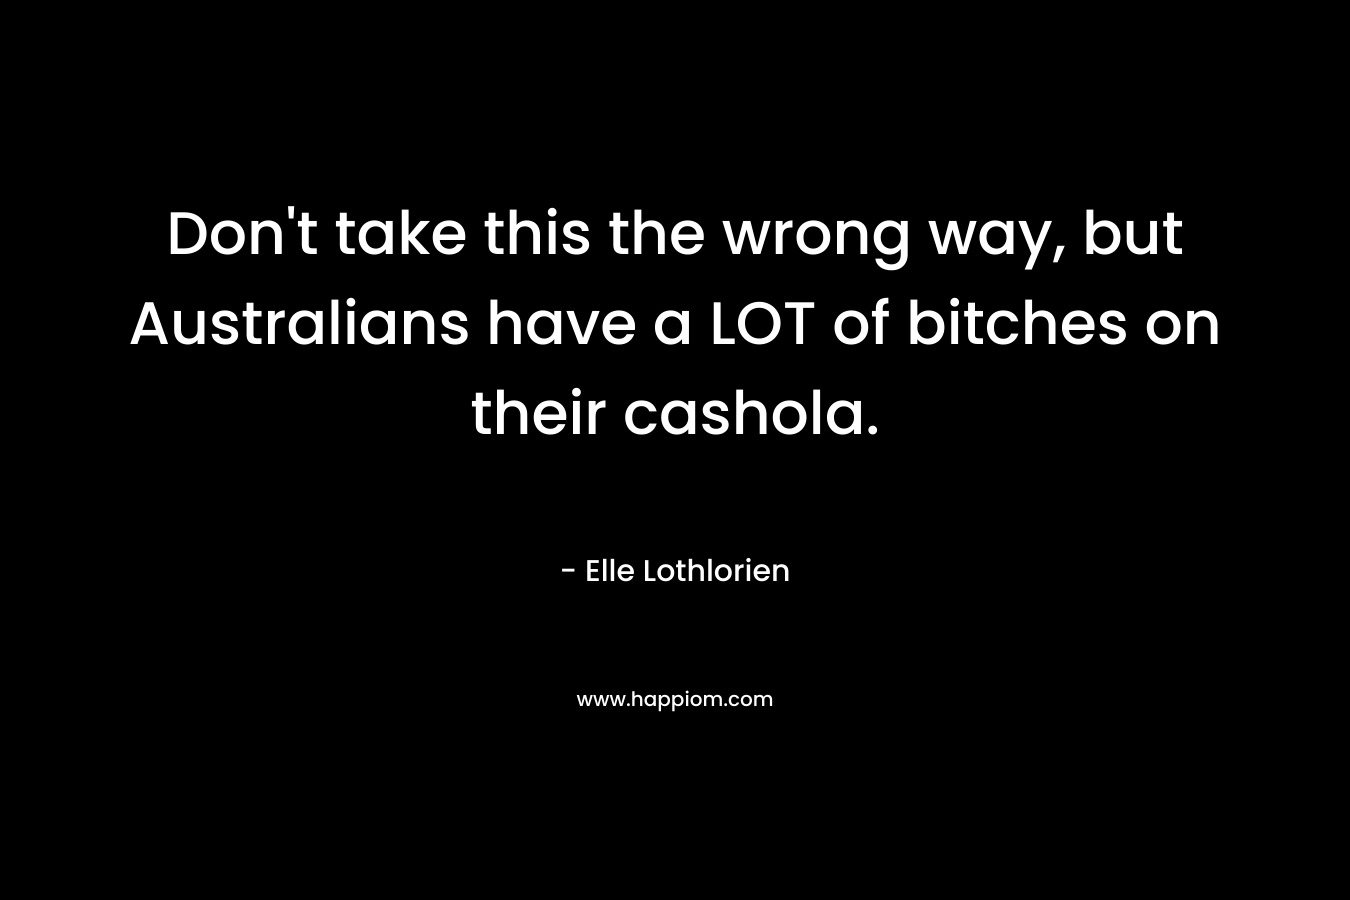 Don't take this the wrong way, but Australians have a LOT of bitches on their cashola.